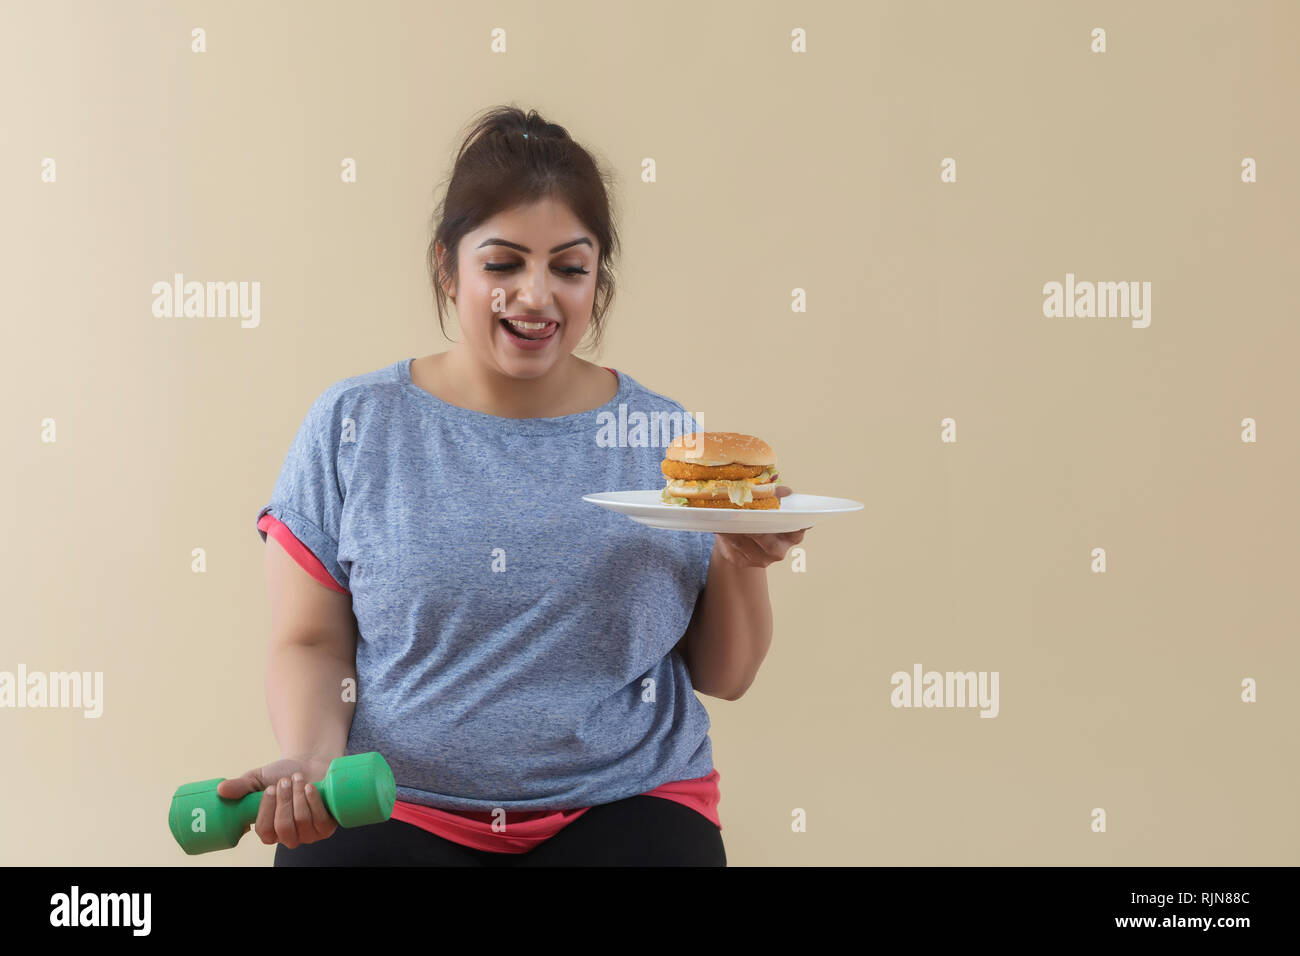 Smiling Overweight Woman holding a burger and dumbbell Stock Photo